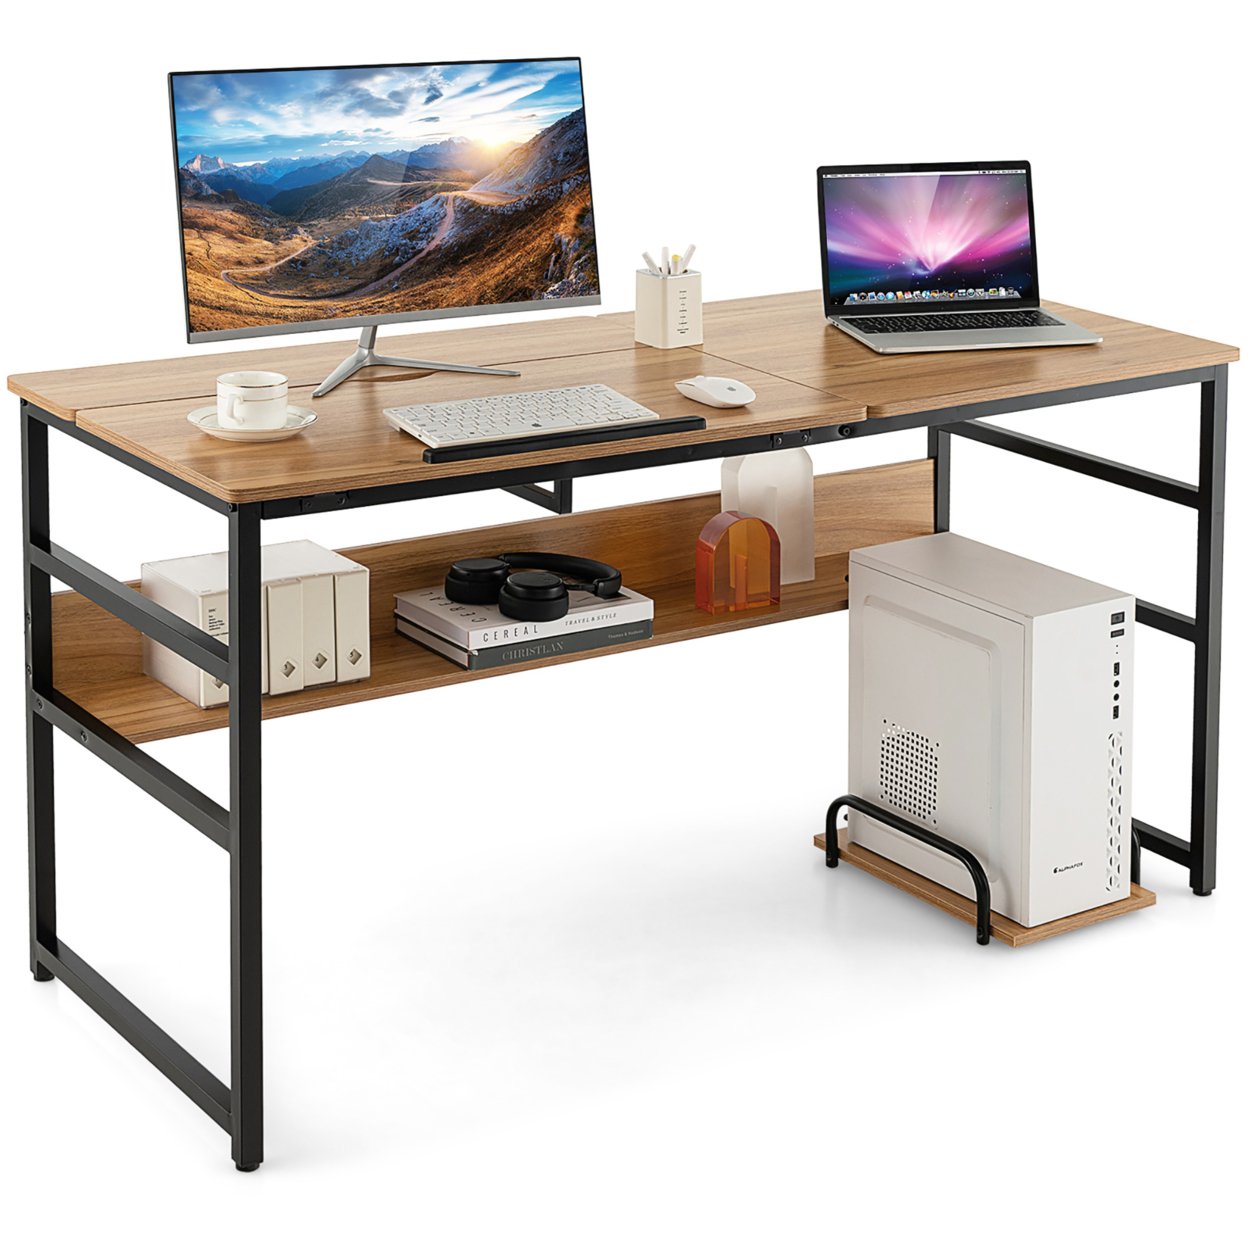 55'' Computer Desk Drafting Table Workstation W/ Tiltable Tabletop & CPU Stand